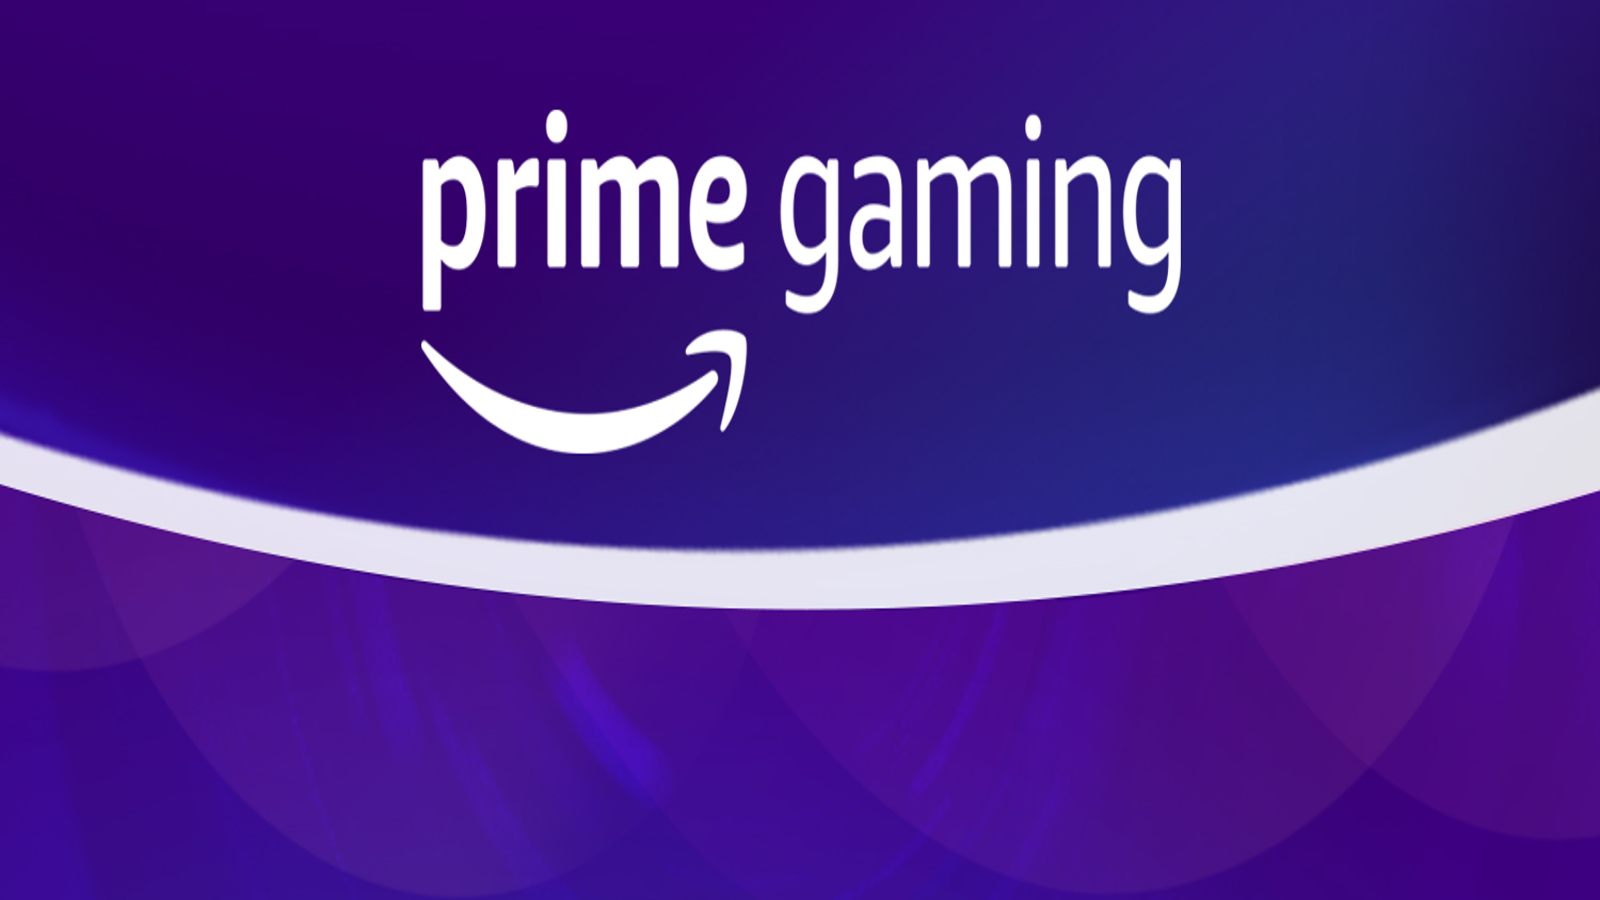 rebrands Twitch Prime to Prime Gaming